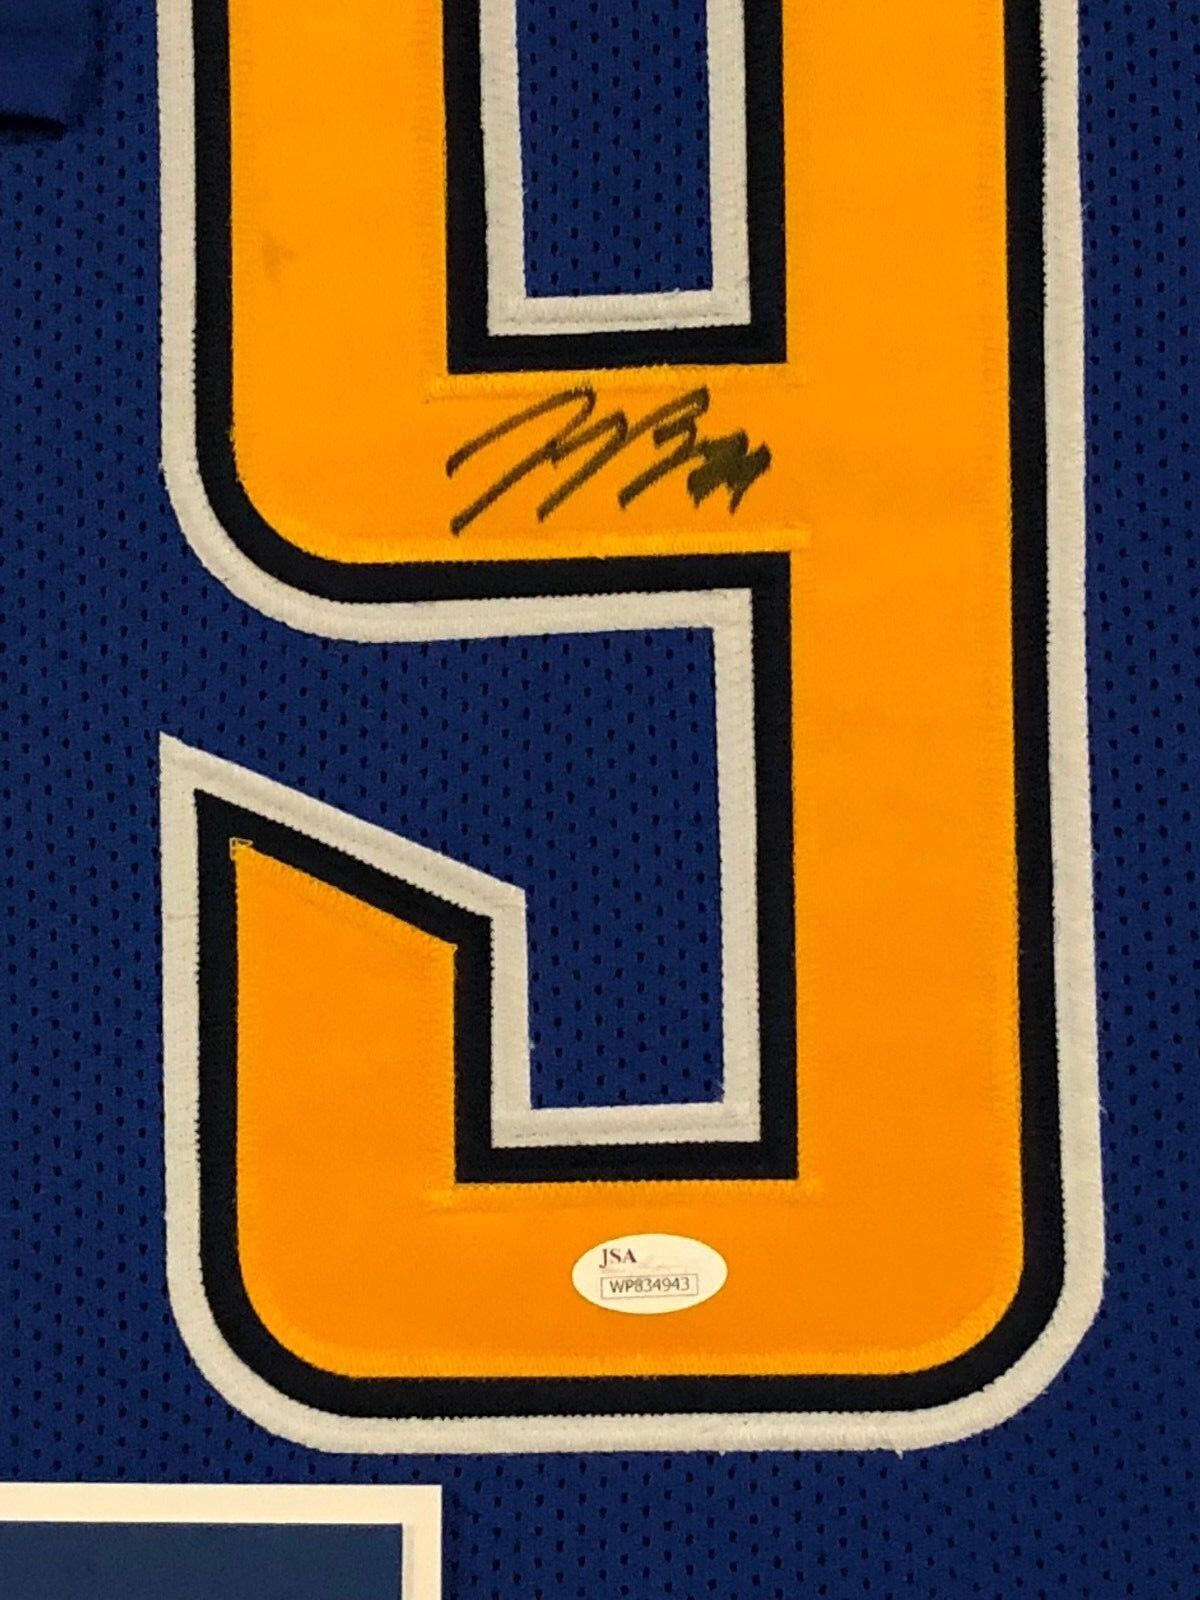 MVP Authentics Framed San Diego Chargers Joey Bosa Autographed Signed Jersey Jsa Coa 450 sports jersey framing , jersey framing